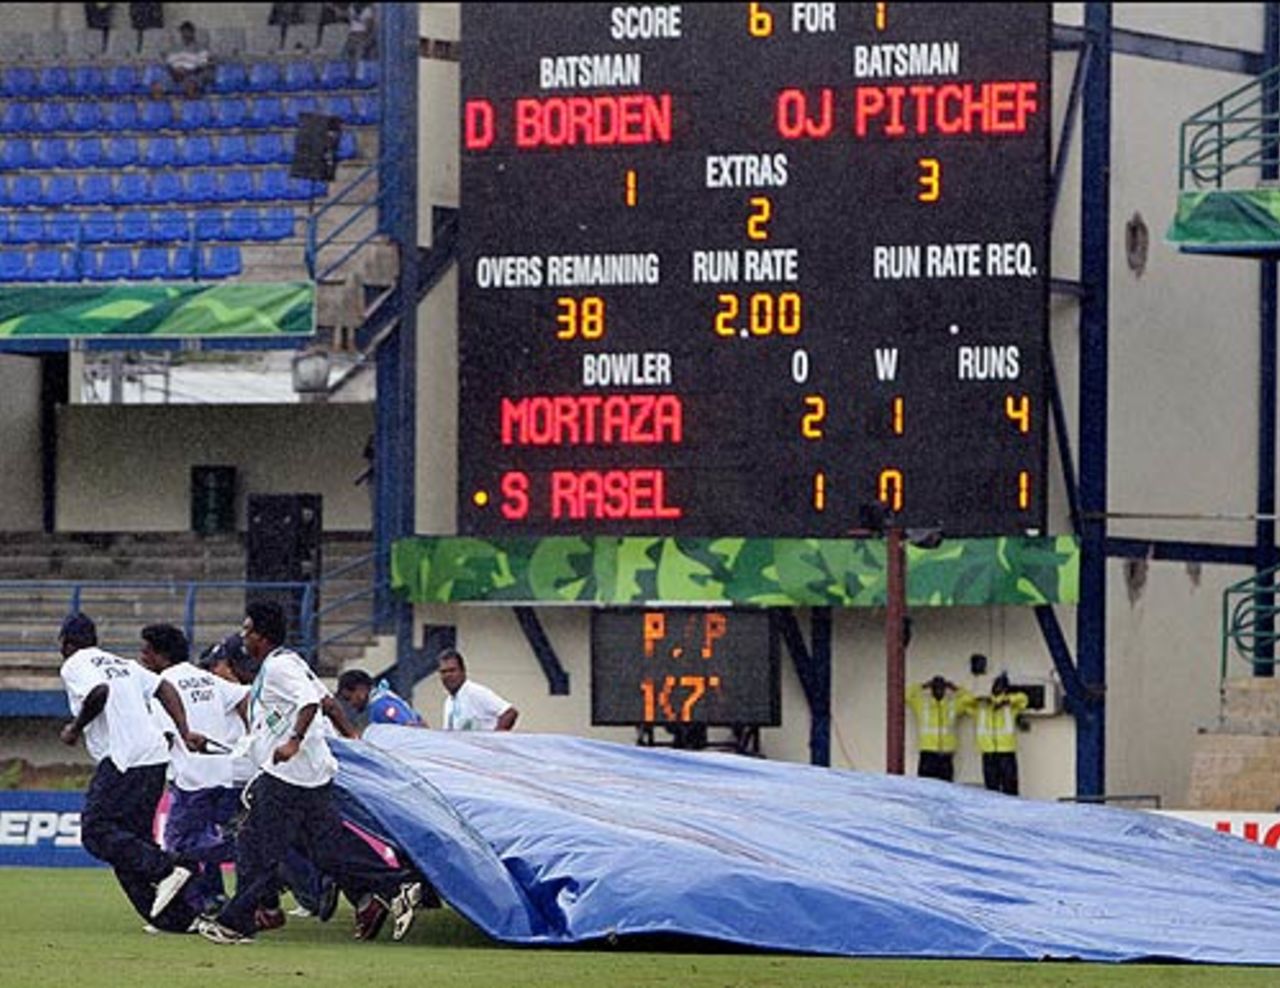 The groundstaff bring on the covers once more, Bangladesh v Bermuda, Trinidad, March 25, 2007